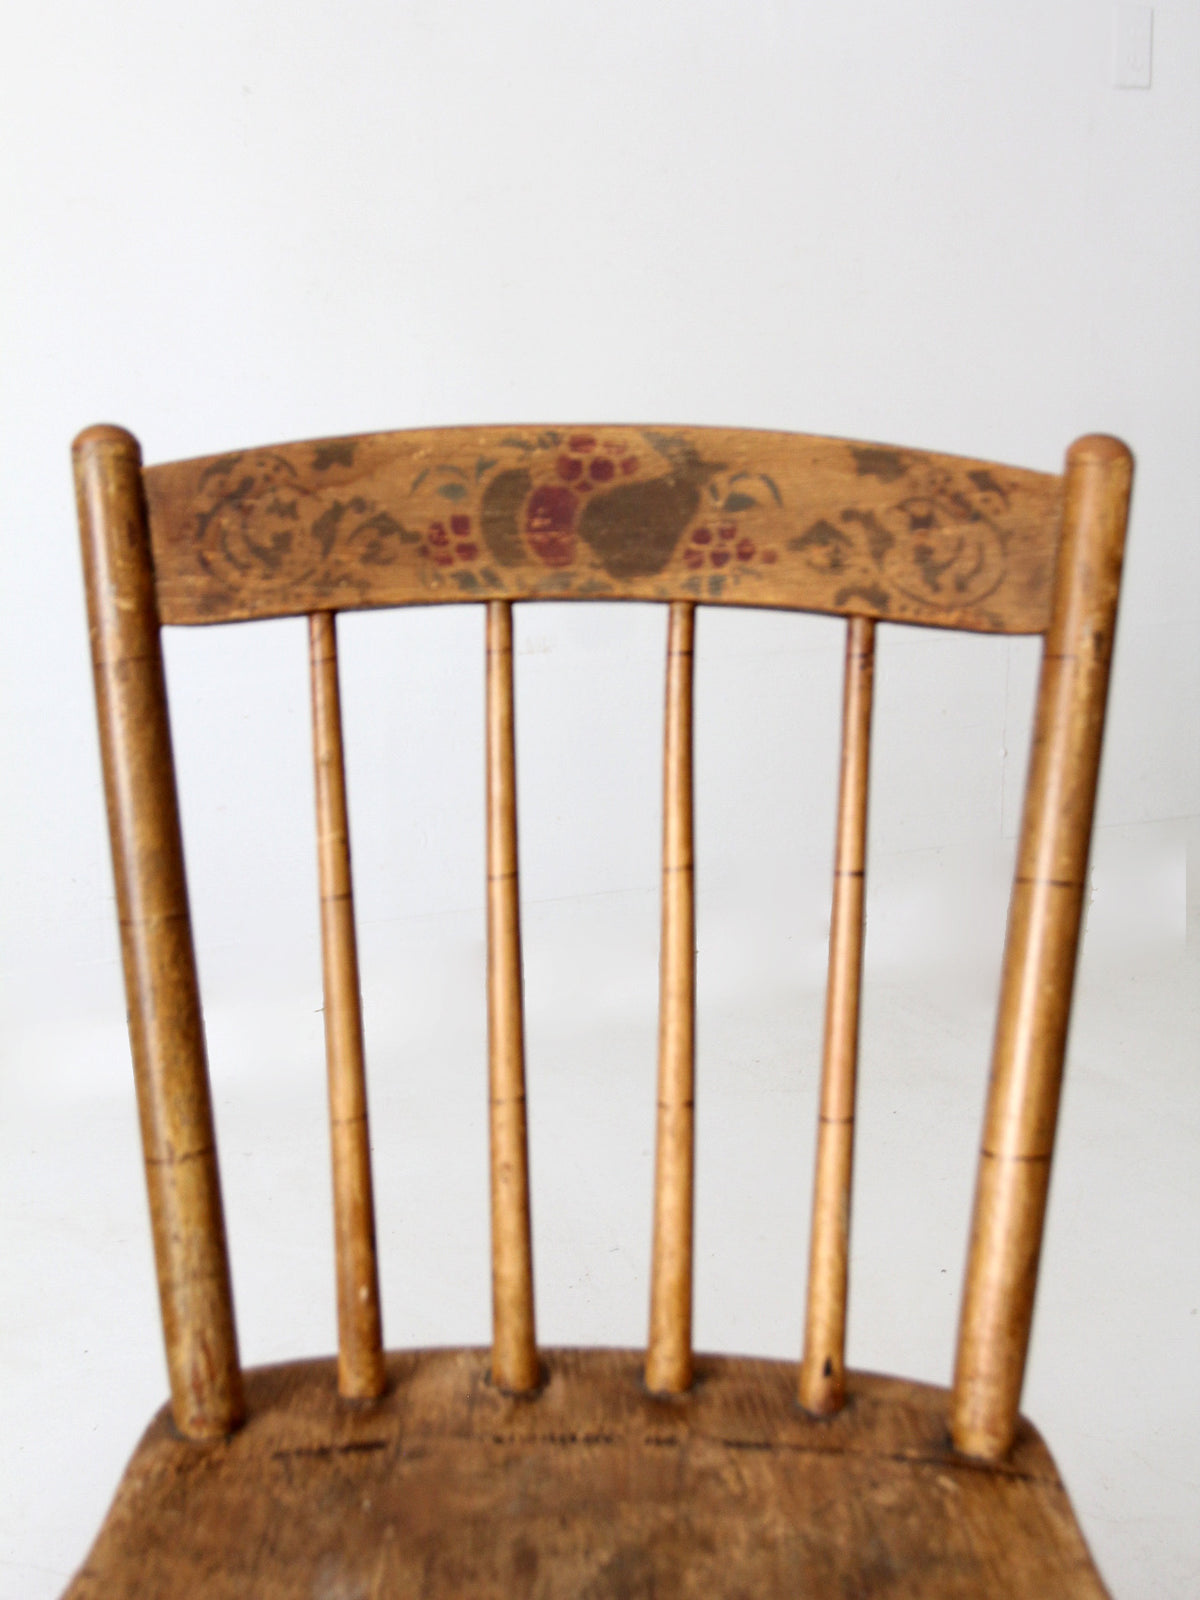 antique stencil back chairs set of 4